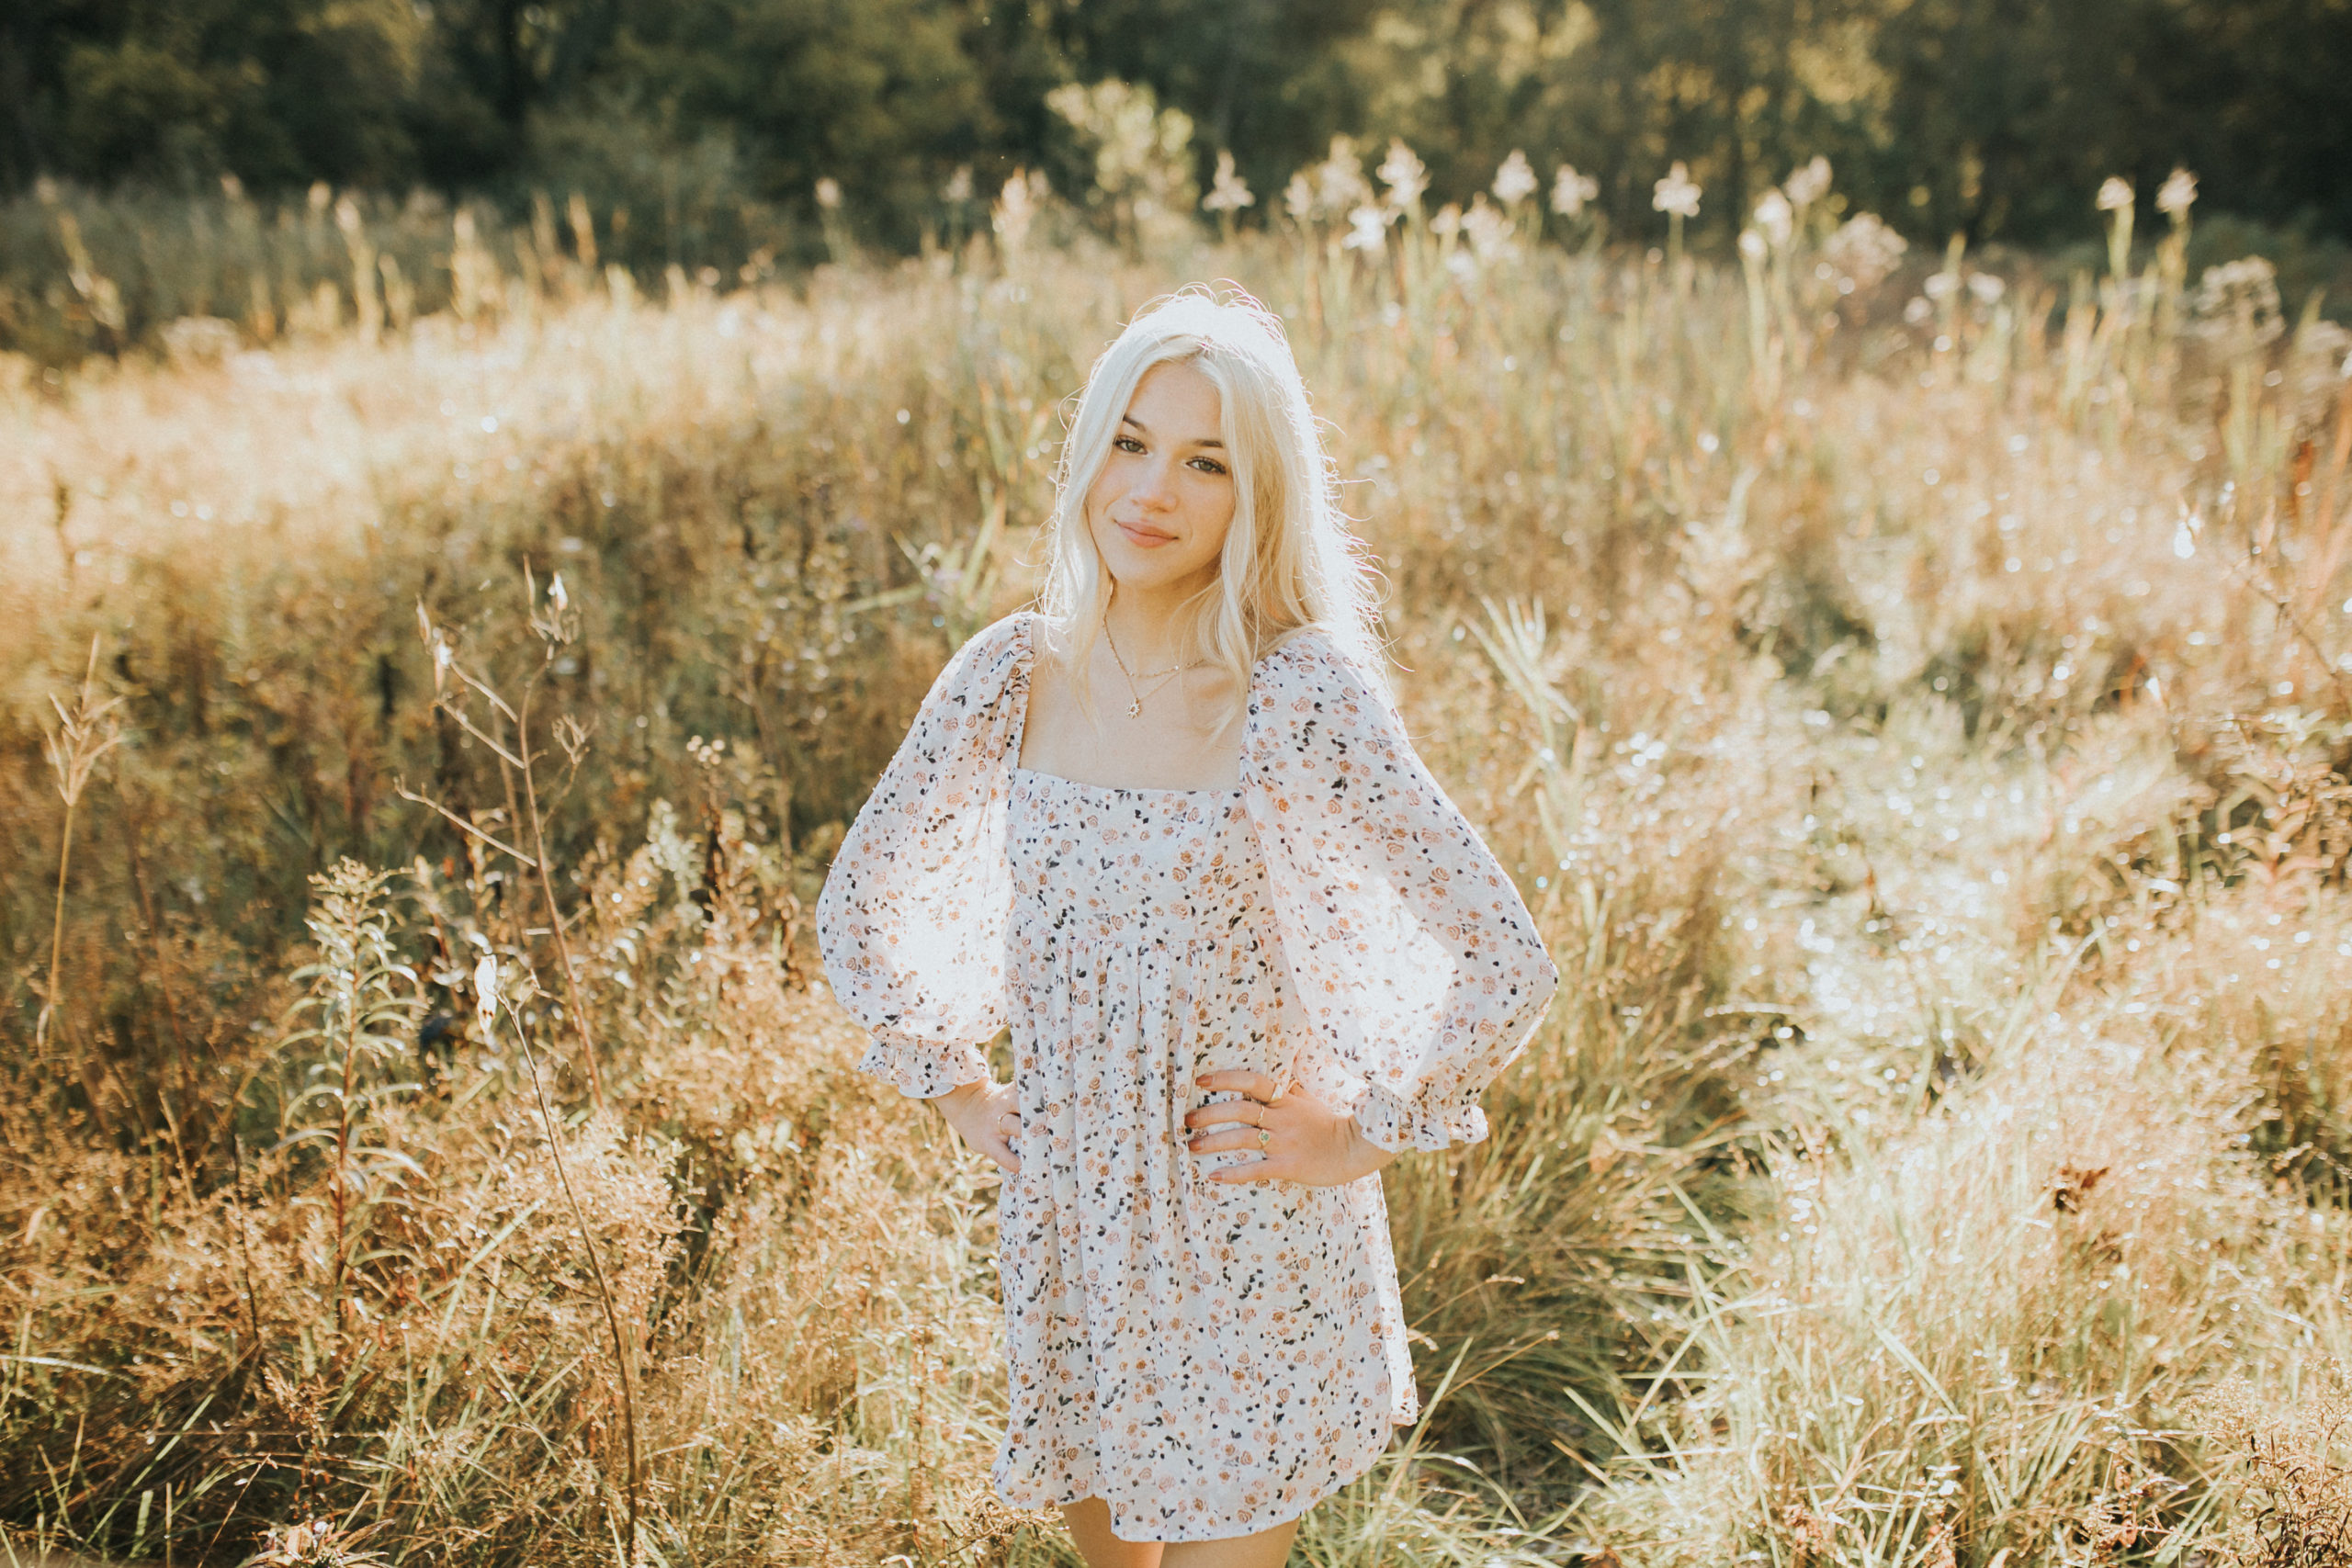 senior photo shoot at cuyahoga valley national park with a strongsville senior in a field wearing a pretty floral dress